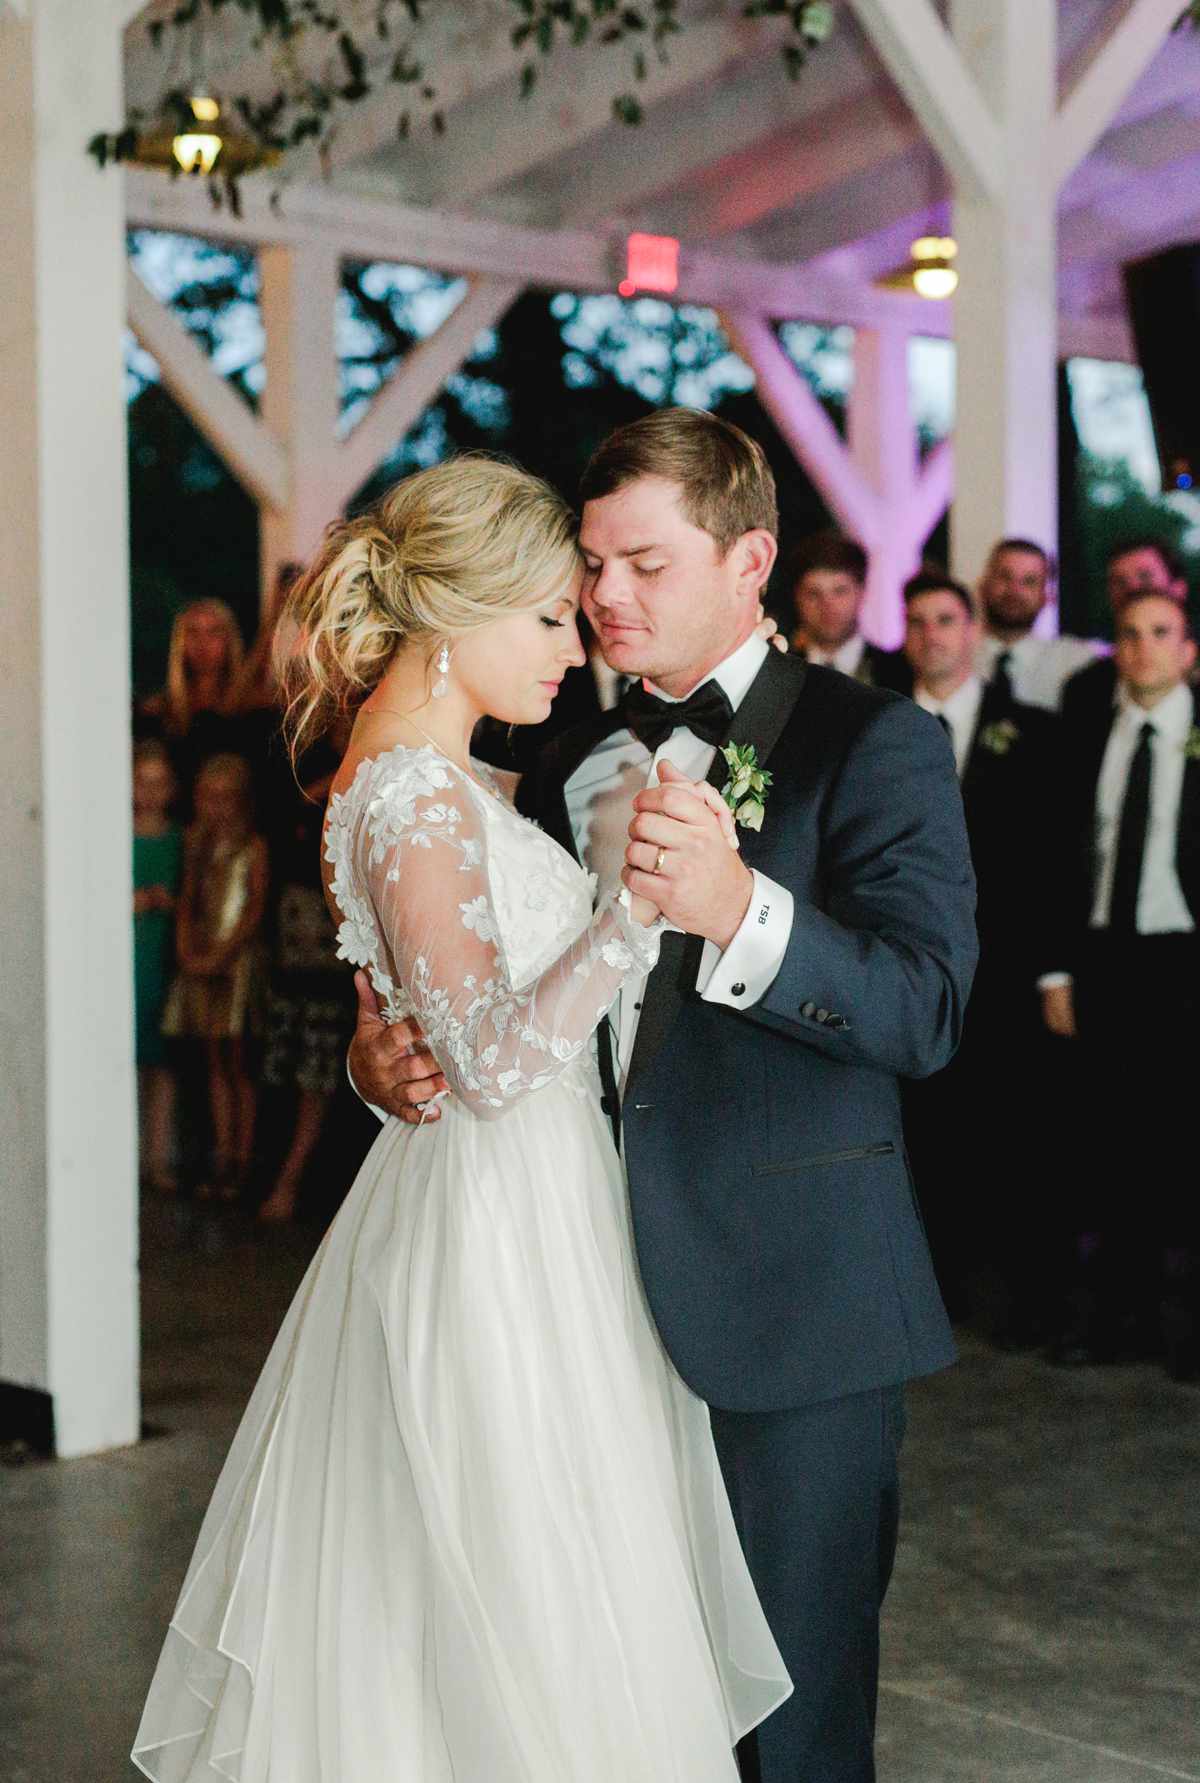 Jamie-Keith and Thomas' First Dance